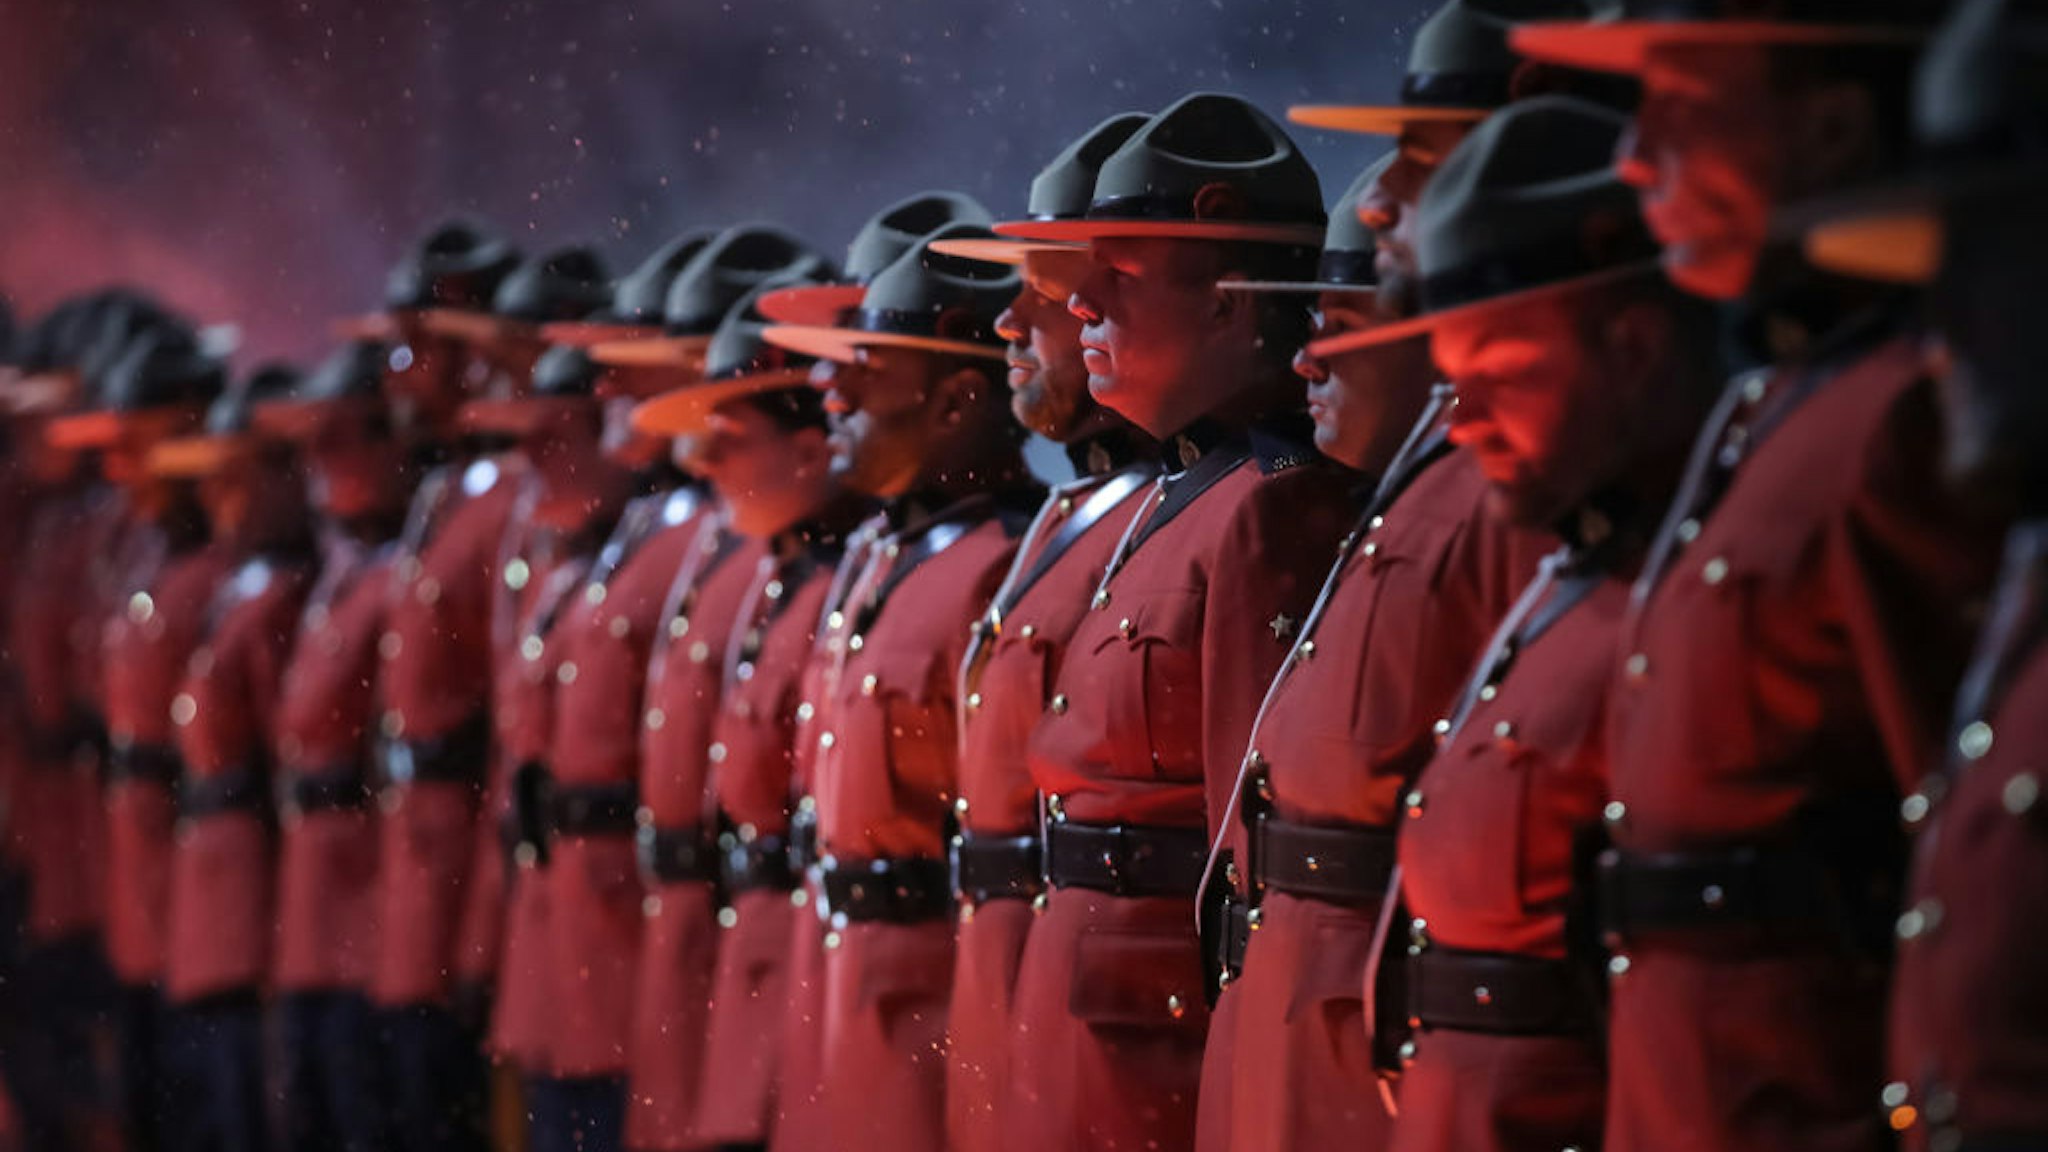 Uniformed Royal Canadian Mounted Police officers line up in a Wall of Honour before the Calgary Flames take on the Winnipeg Jets during the 2019 Tim Hortons NHL Heritage Classic at Mosaic Stadium on October 26, 2019 in Regina, Saskatchewan, Canada